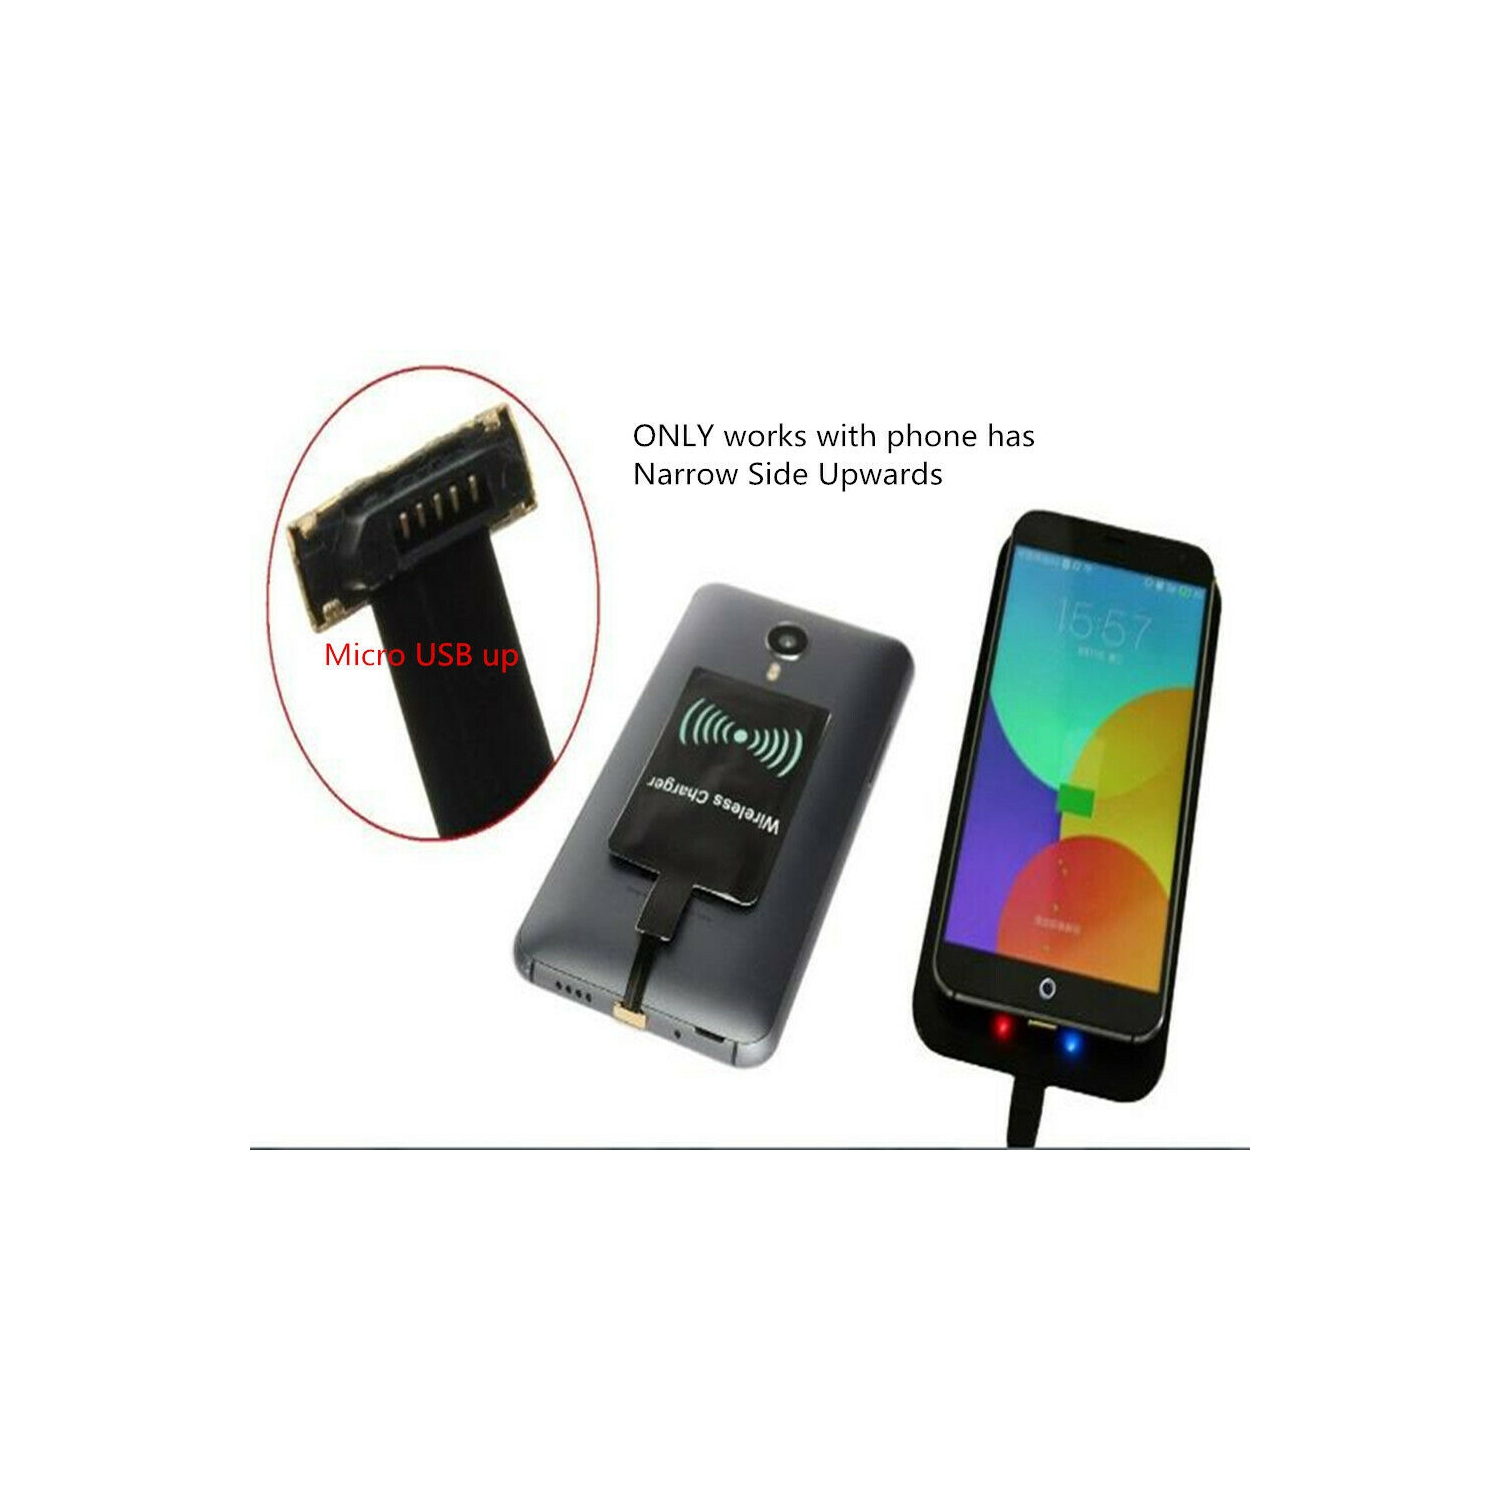 Qi Wireless Charger Charging Receiver Pad (Micro USB Port UP) for Samsung / LG / Sony / Google / Motorola / Android Phones